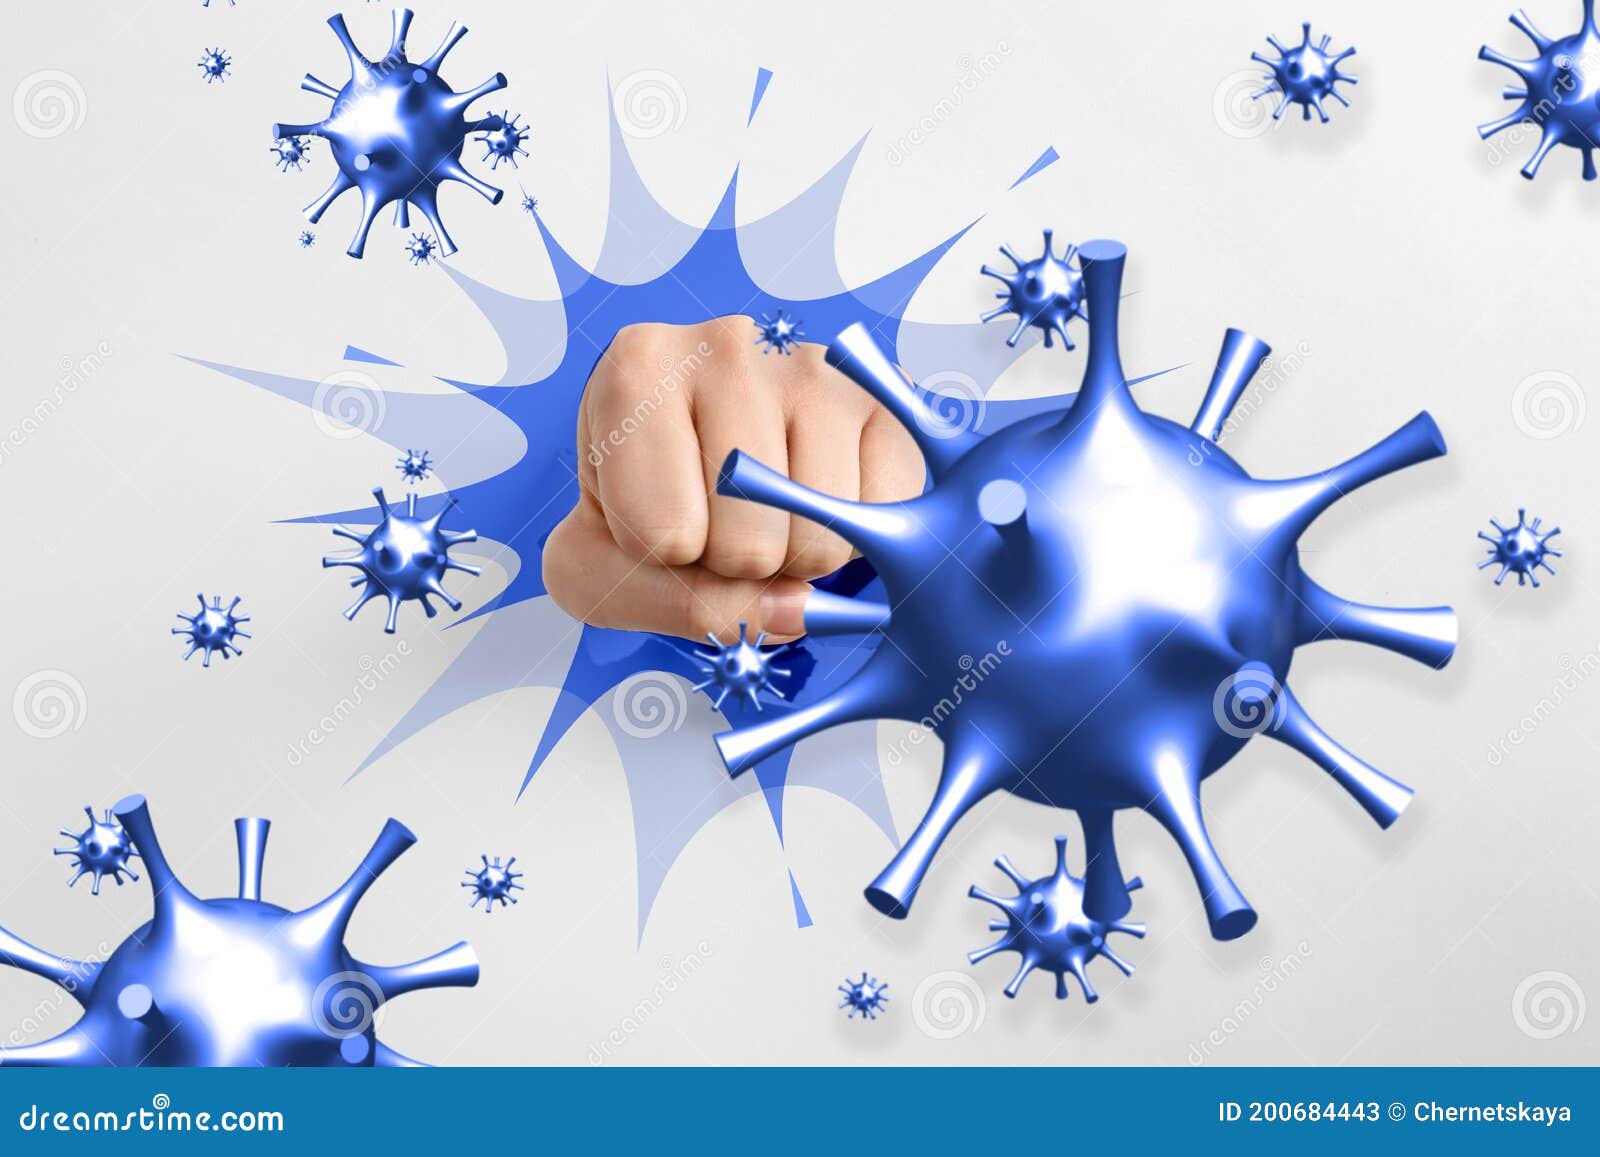 be healthy - boost your immunity to fight with illness. woman showing clenched fist surrounded by viruses, closeup